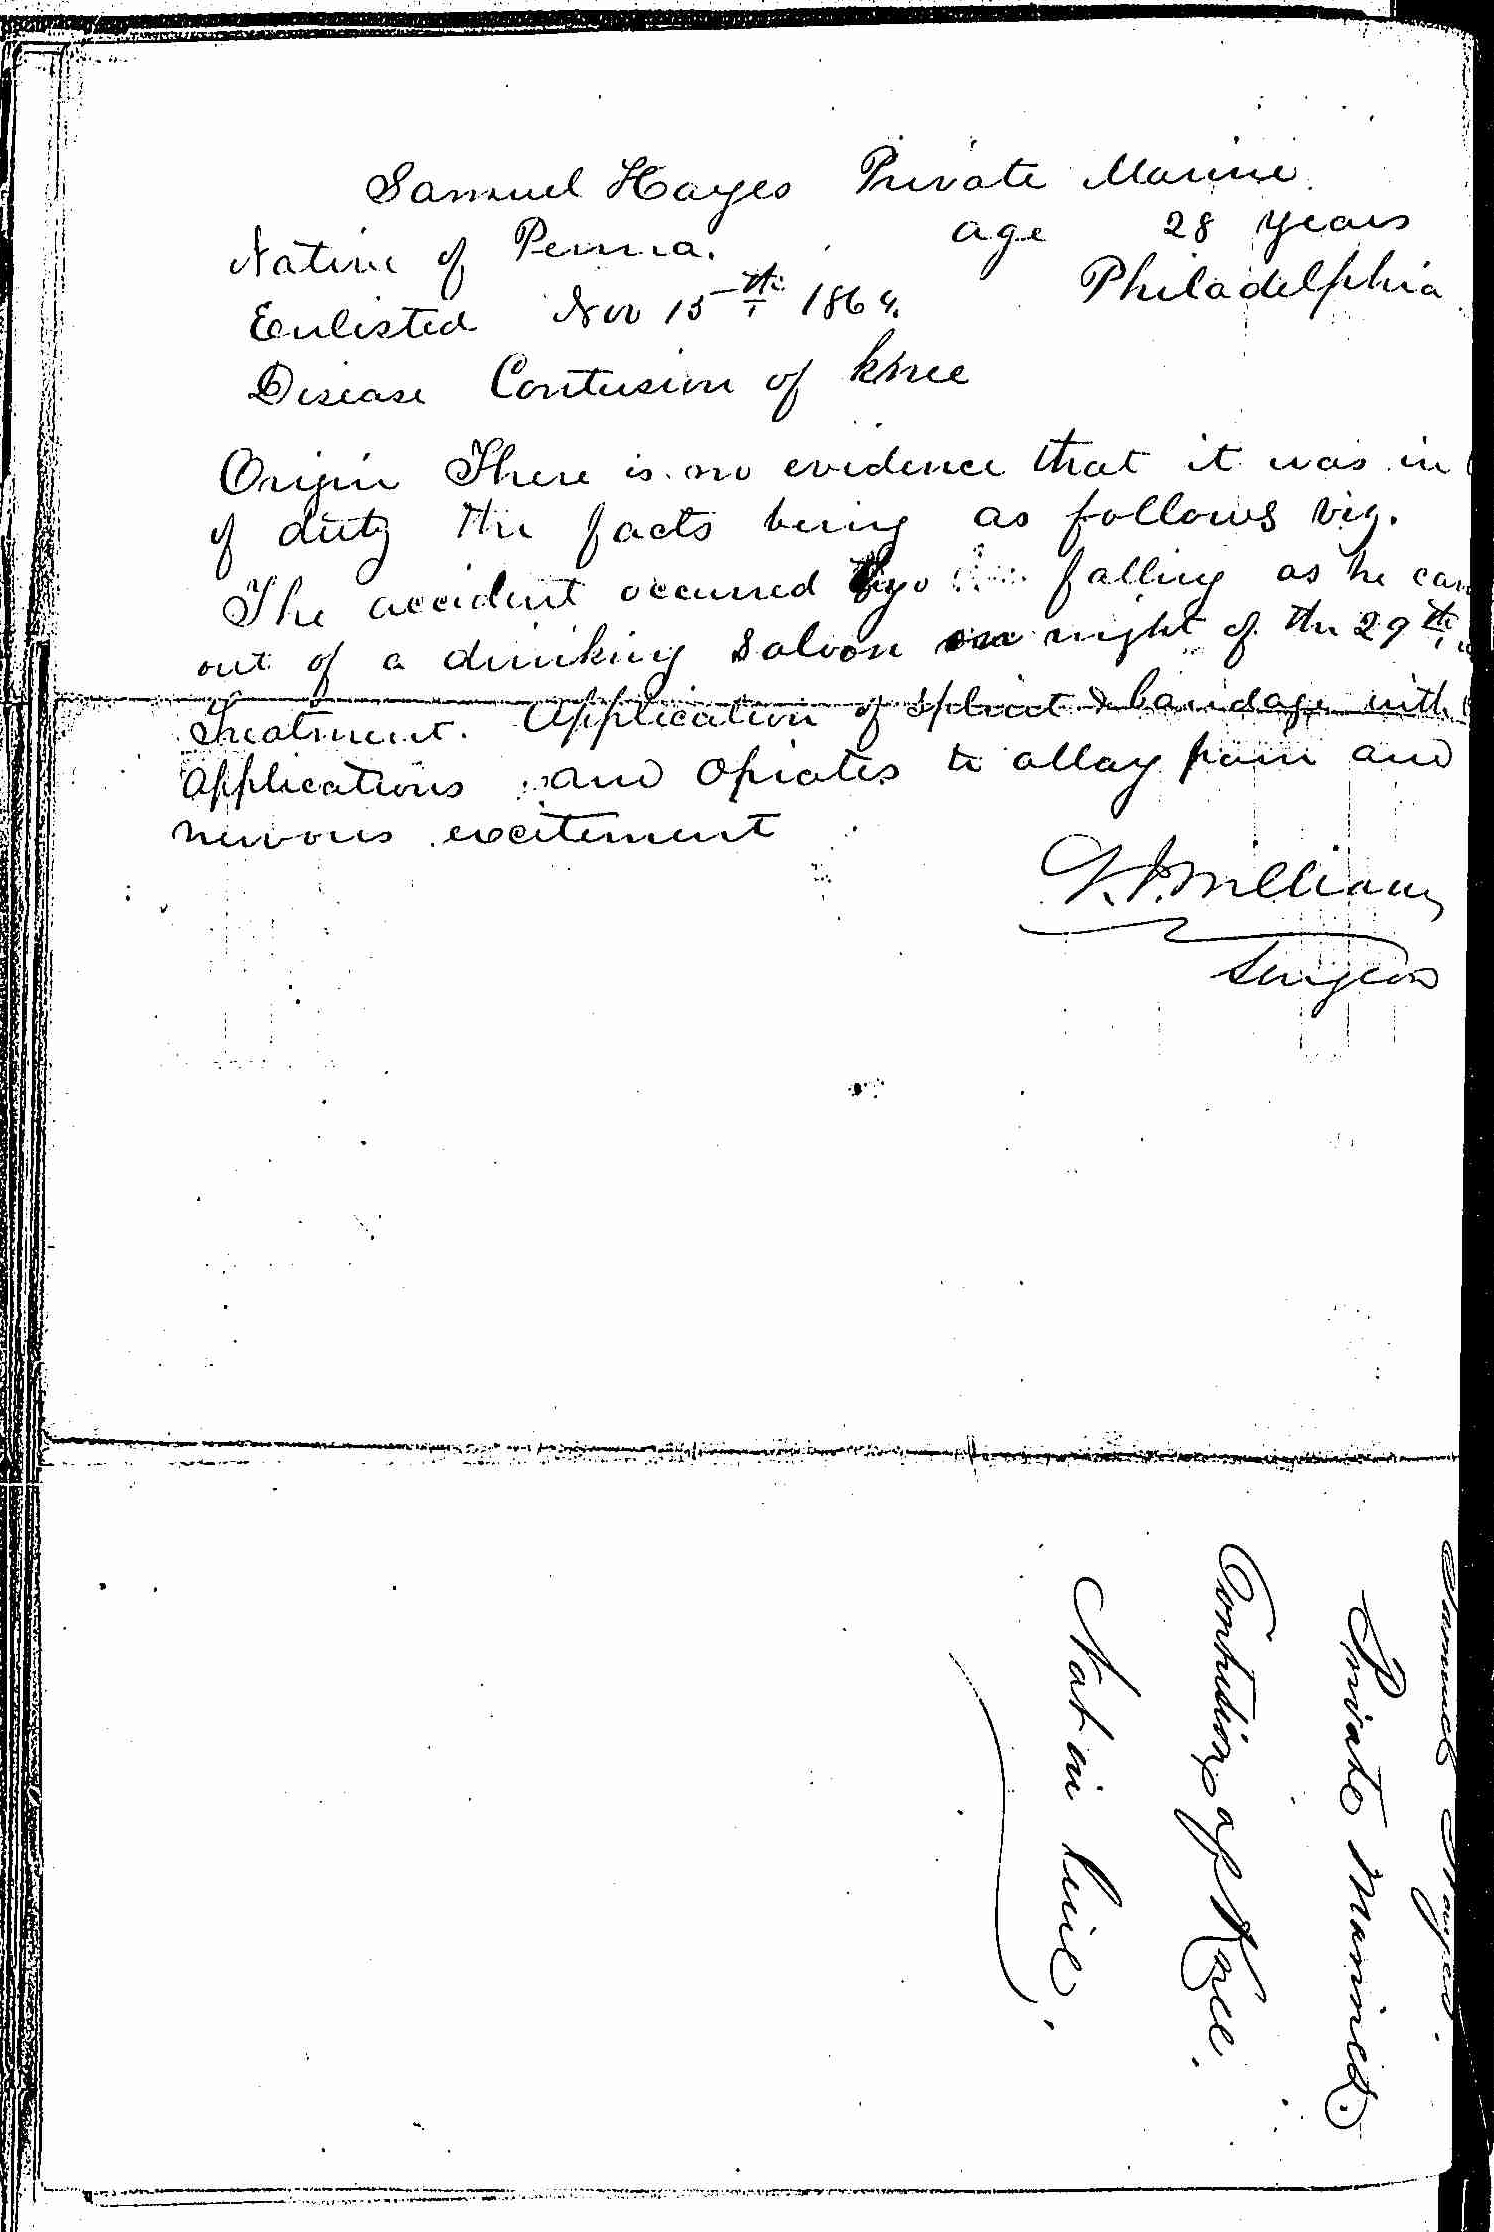 Entry for Samuel Hayes (first admi ssion page 2 of 2) in the log Hospital Tickets and Case Papers - Naval Hospital - Washington, D.C. - 1865-68